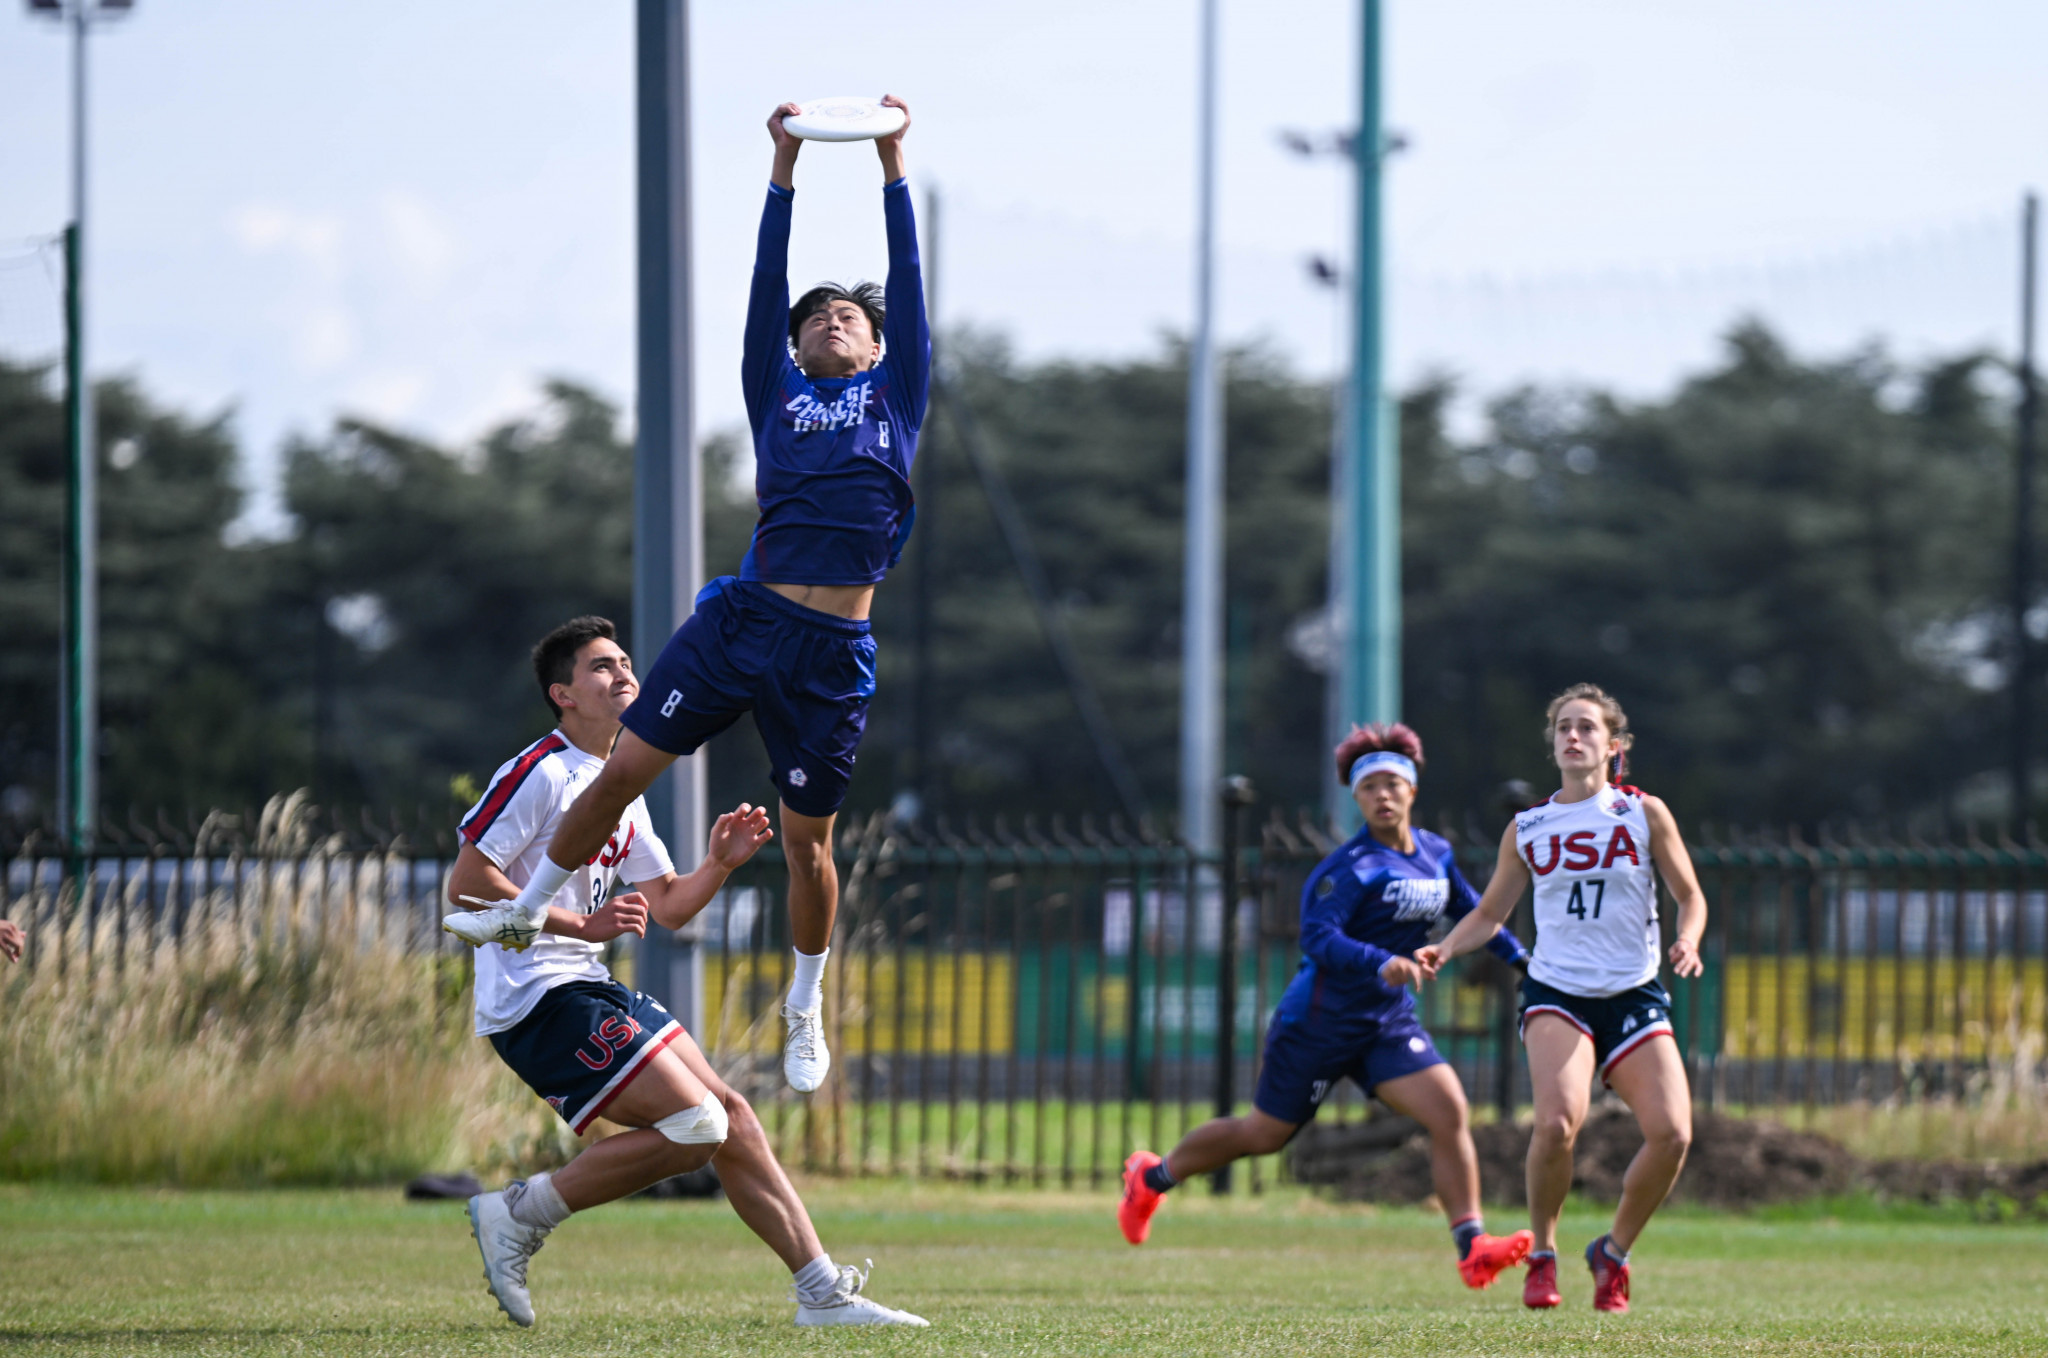 Teams from 22 countries compete in Nottingham at WFDF World Under-24 Ultimate Championships